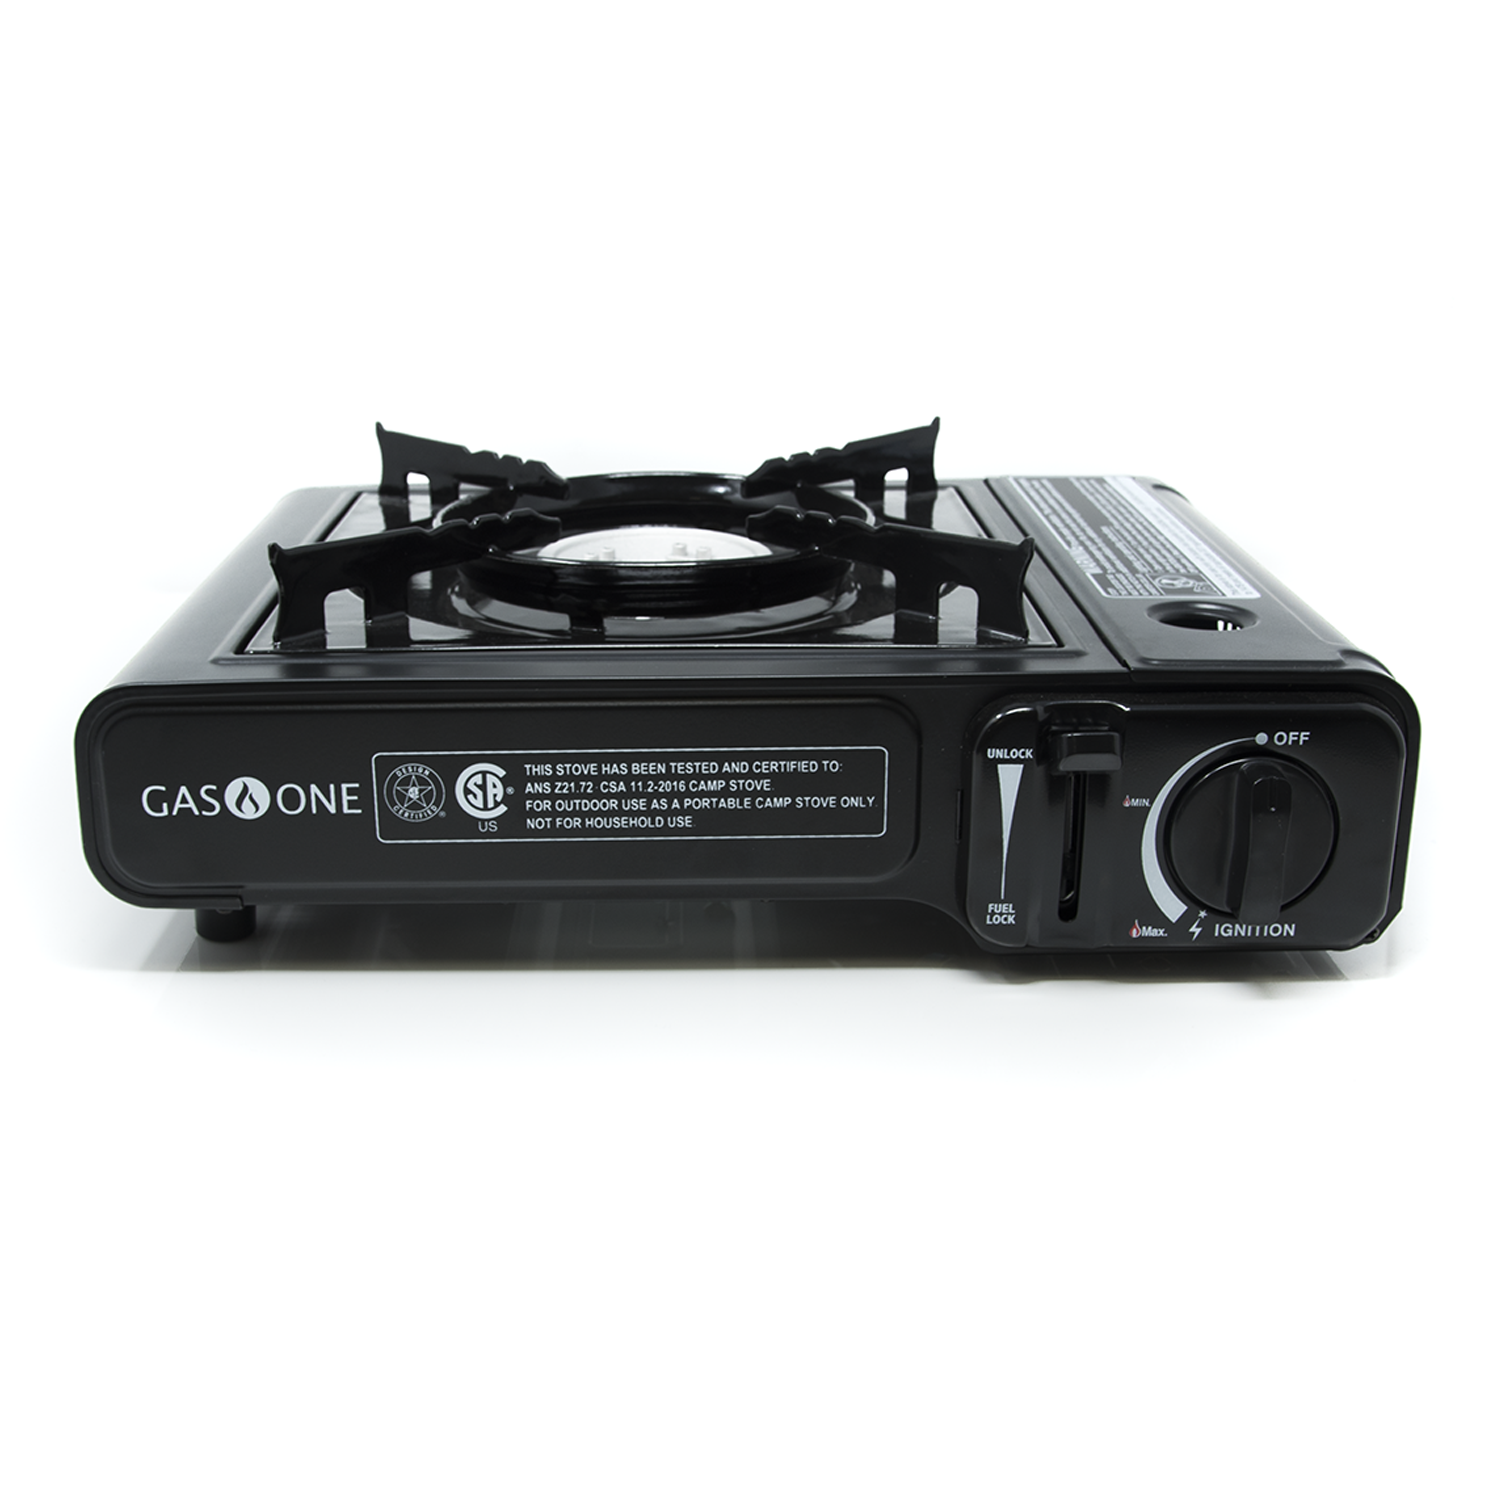 Portable gas stove - Gas stove for indoor use